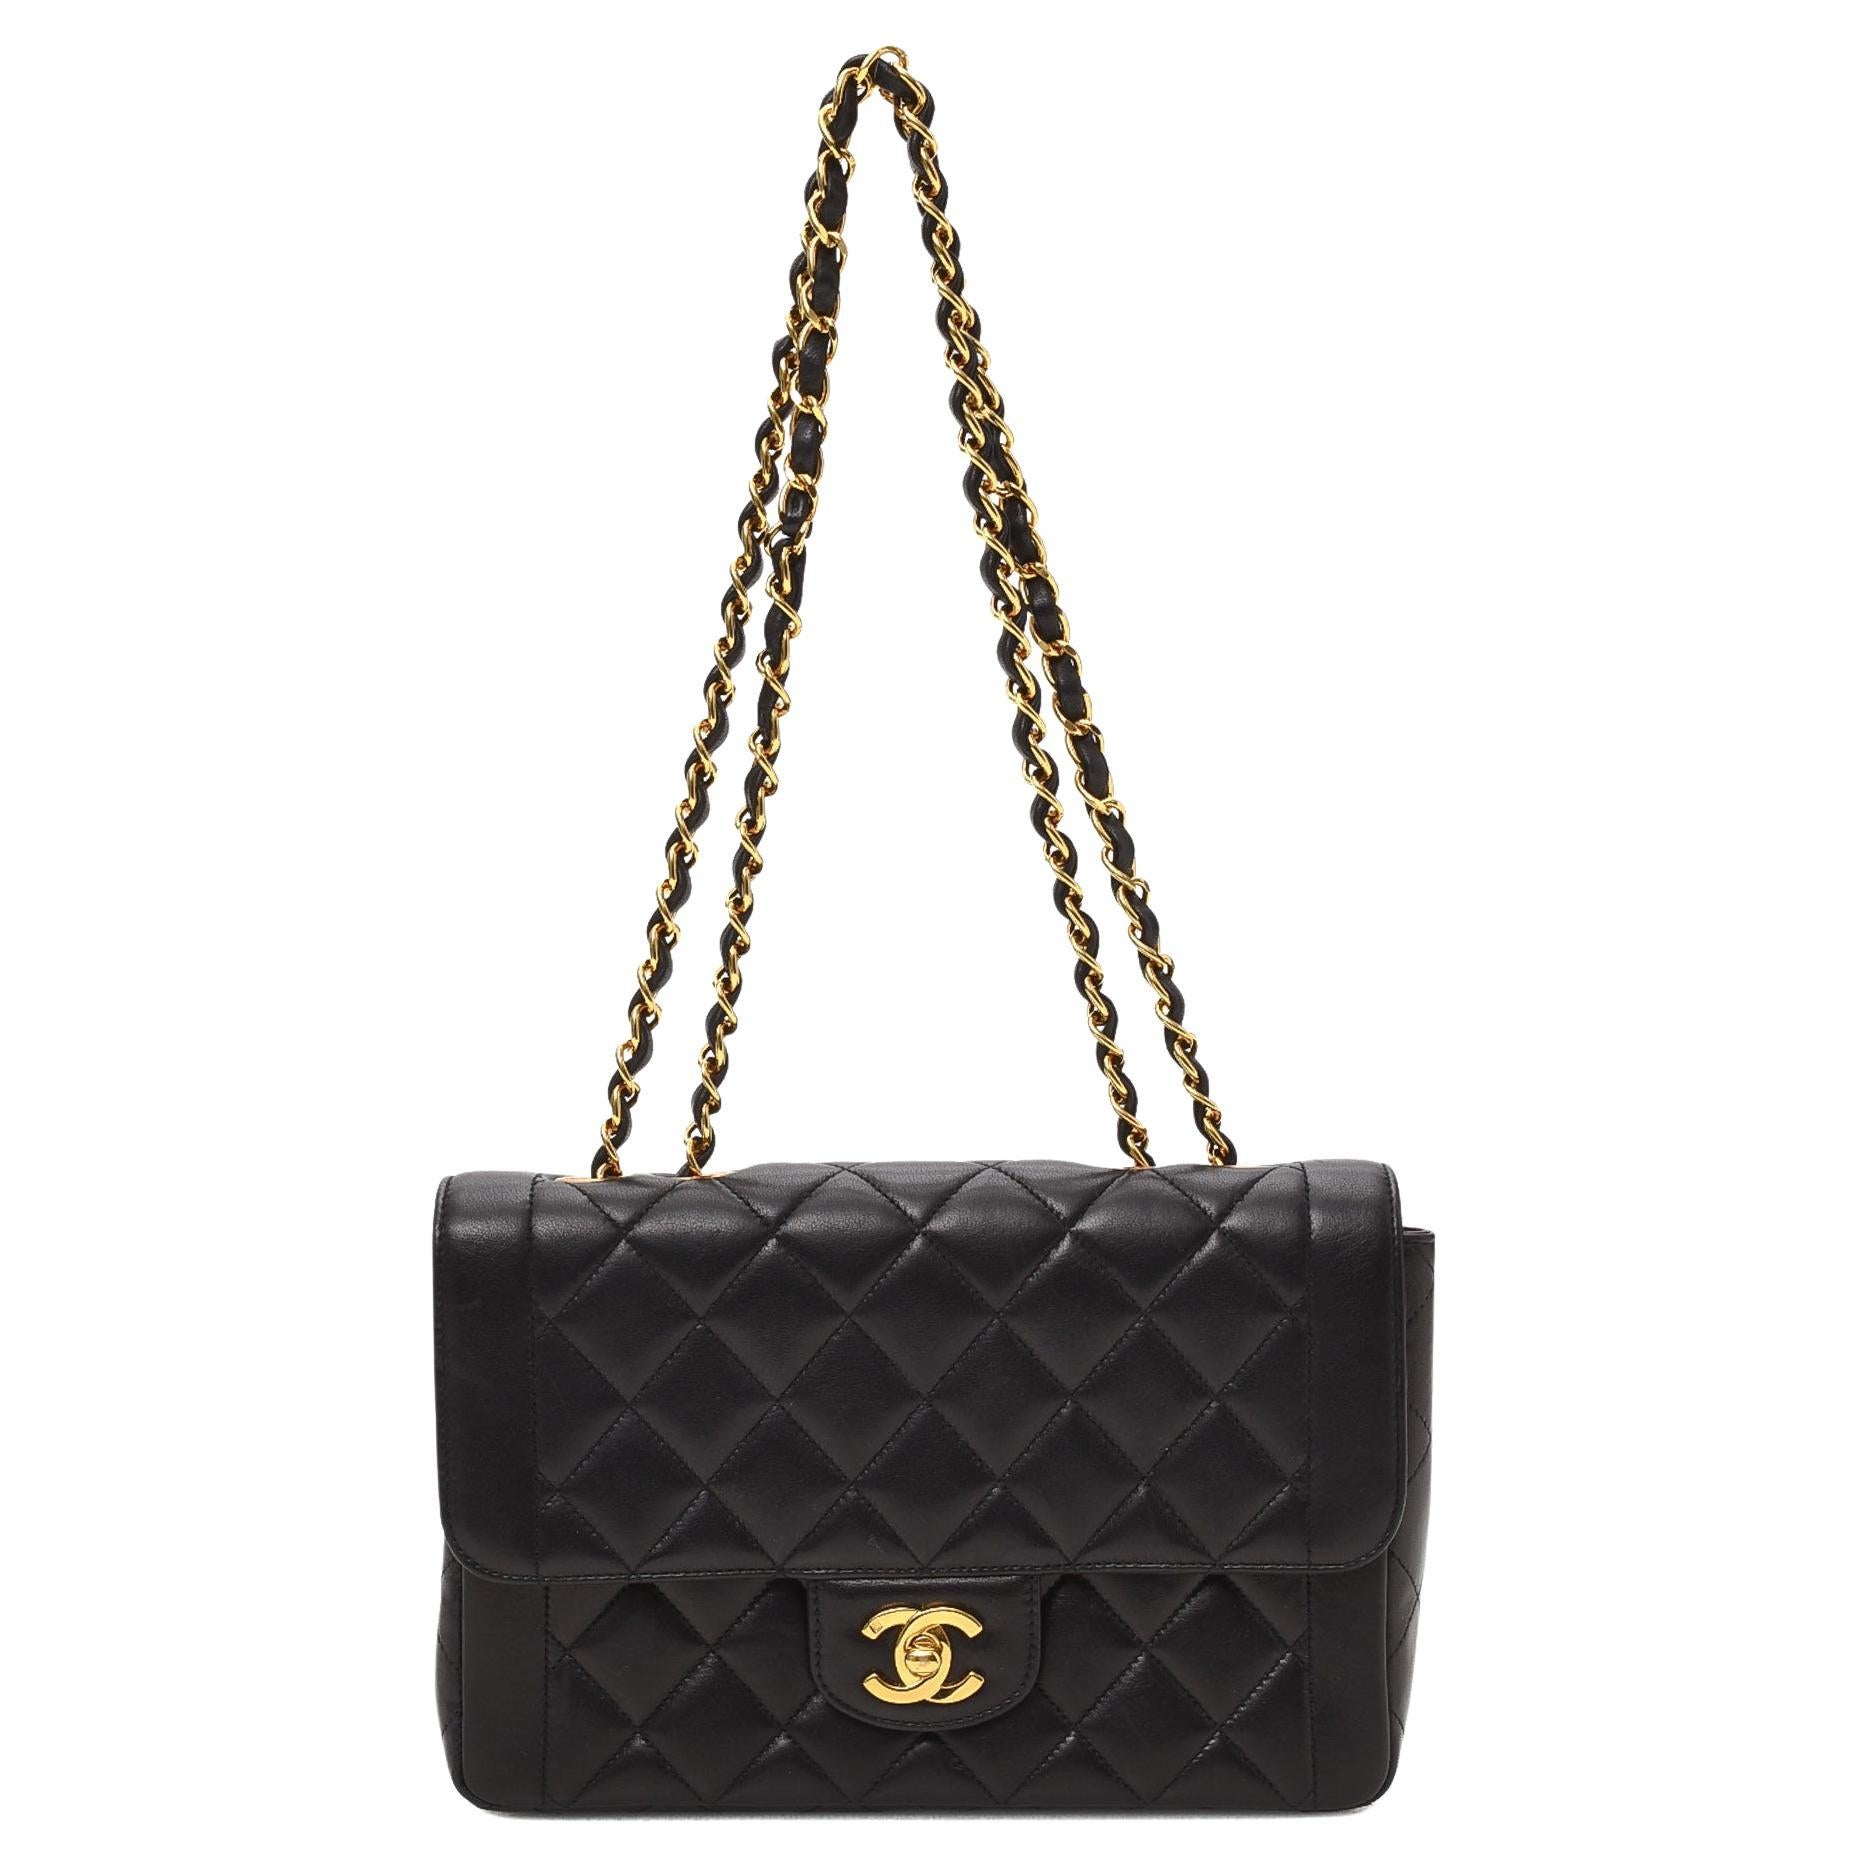 Chanel Black Quilted Lambskin Leather CC Small Single Flap Shoulder Bag For Sale